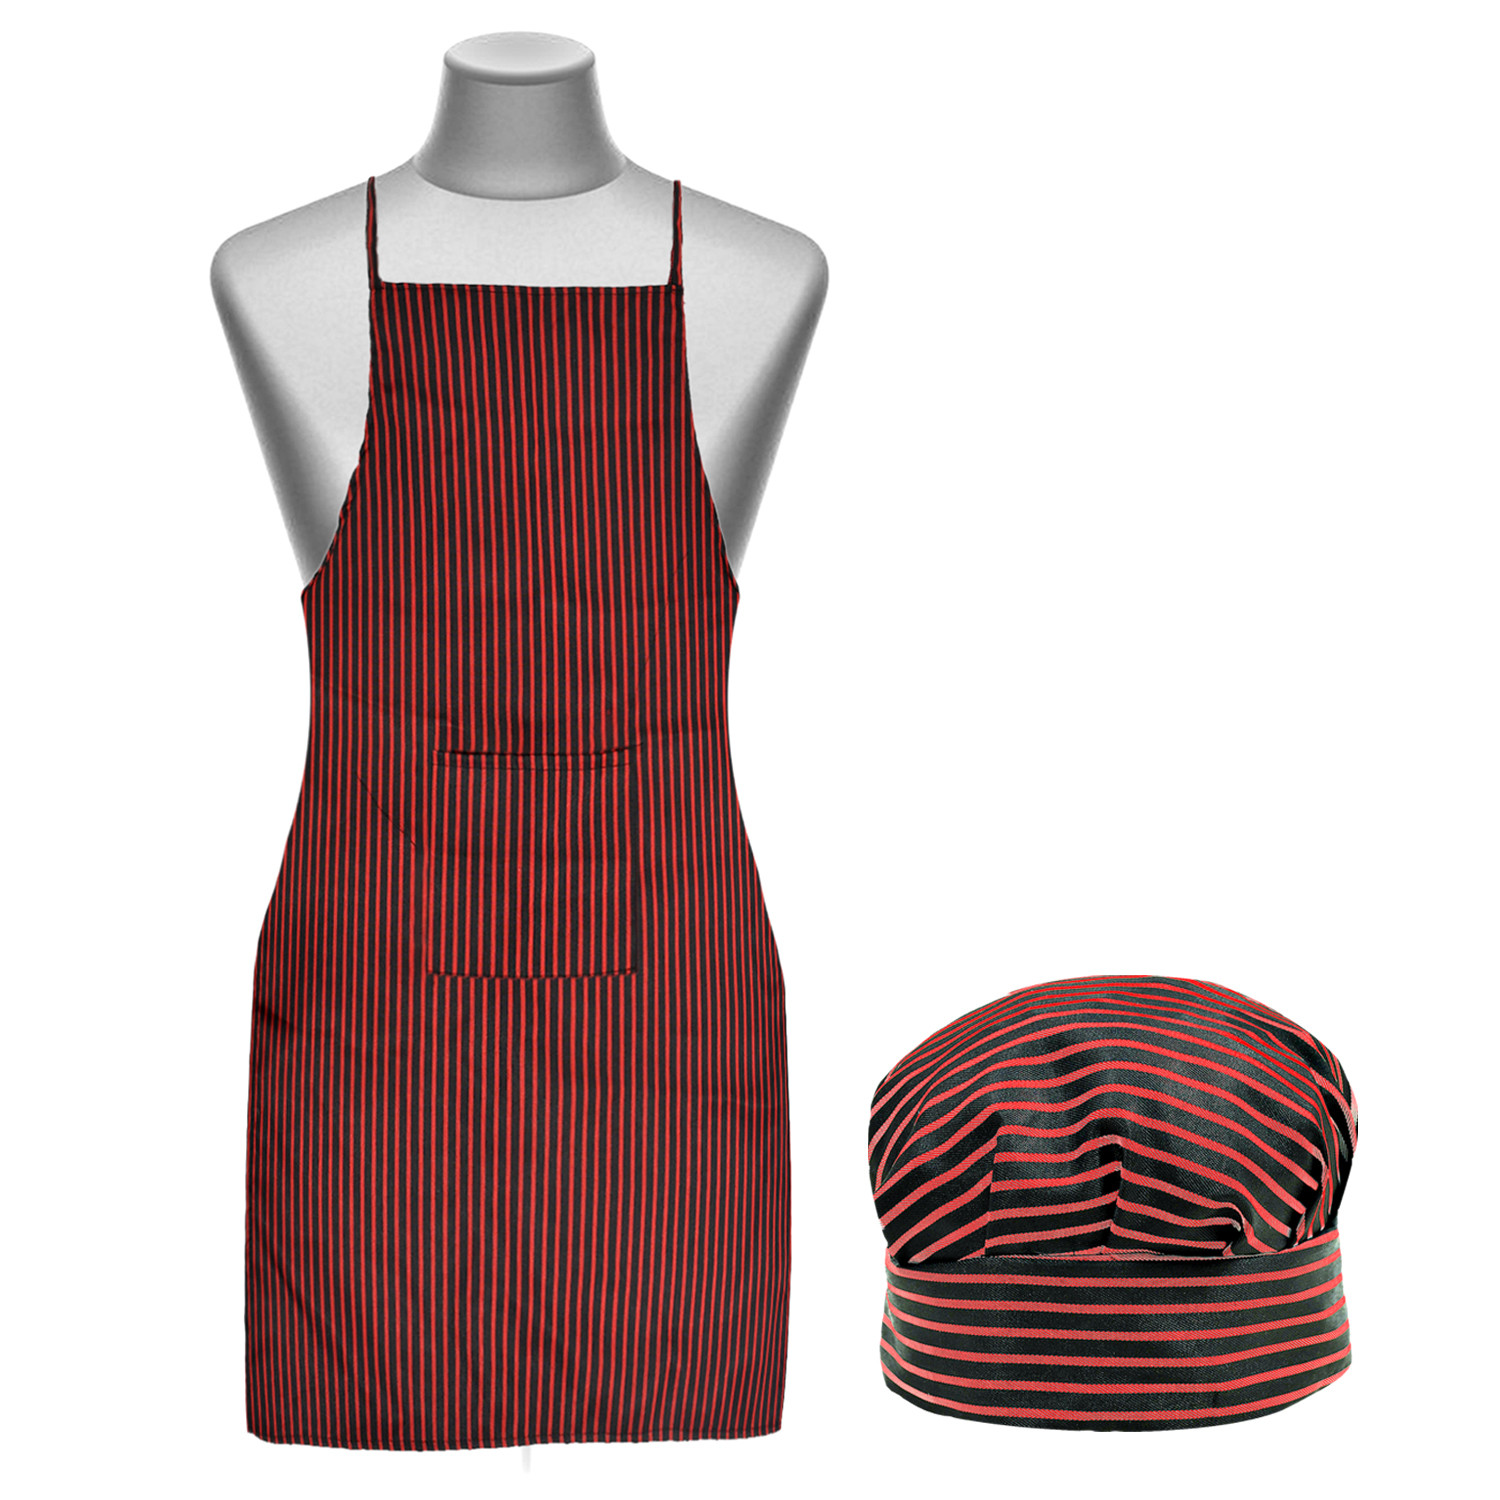 Kuber Industries Linning Printed Apron & Cooking Cap Set For Cooking, Baking, Party Favors, Home Kitchen, Restaurant, (Black & Maroon)